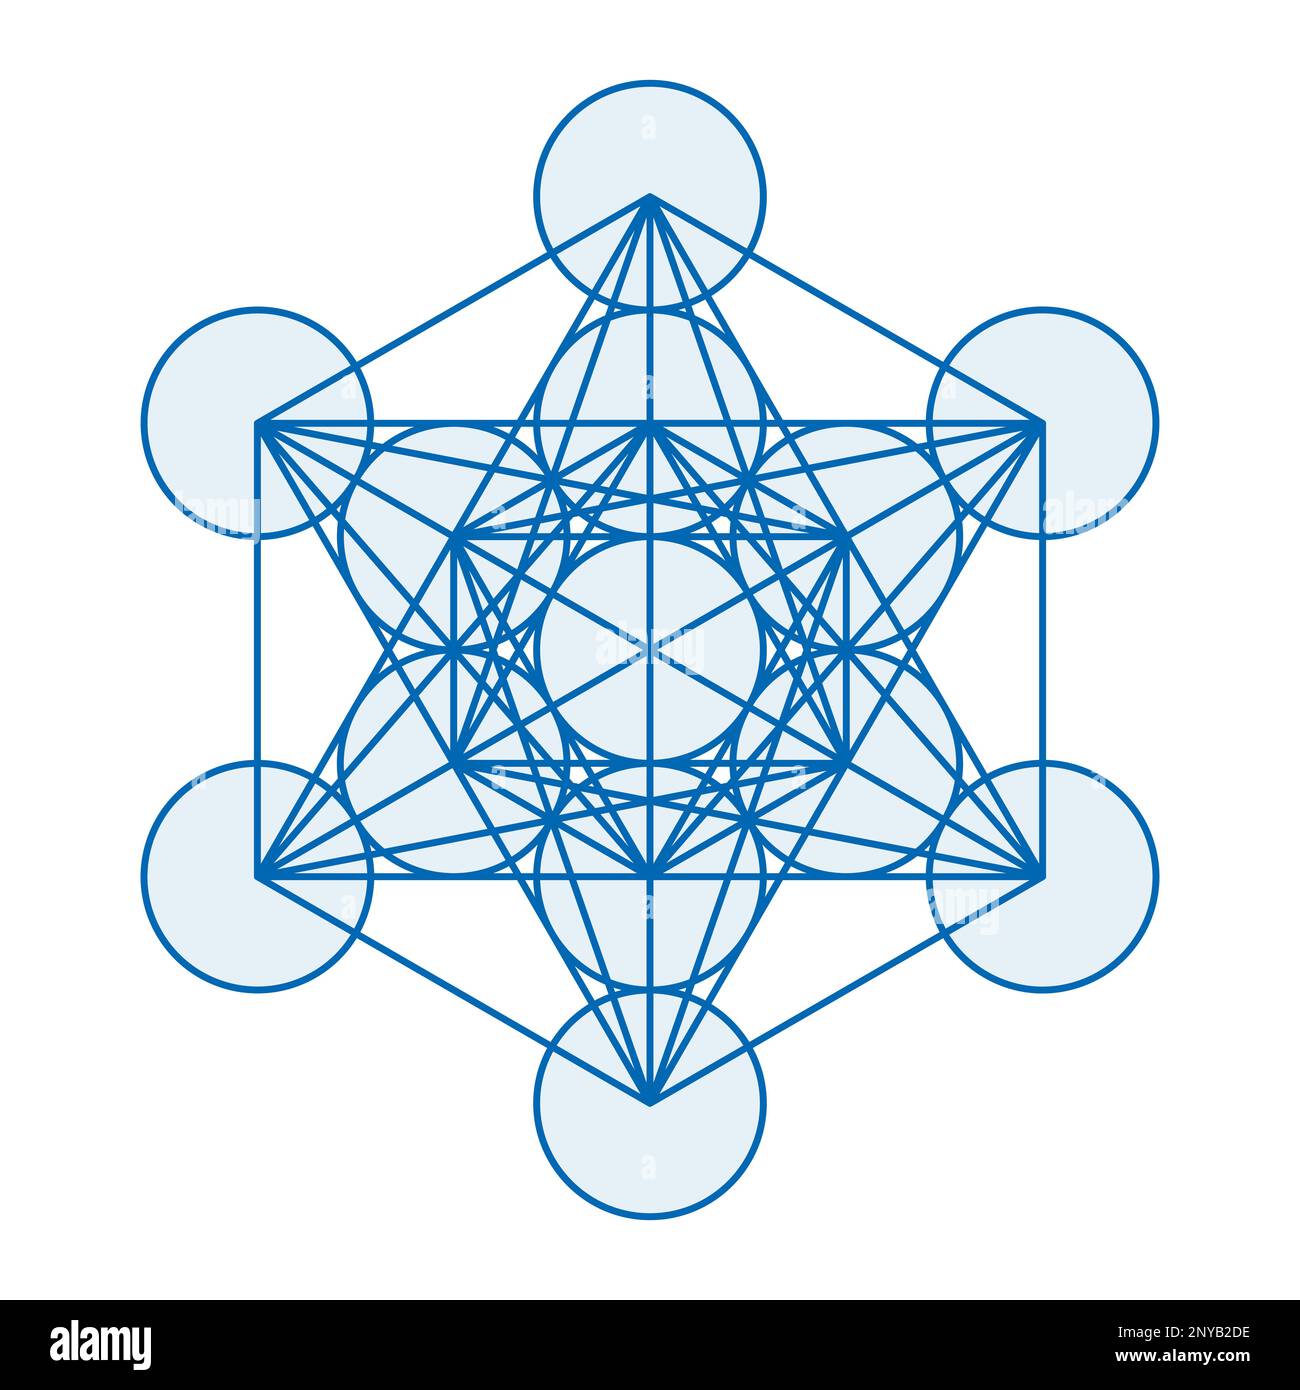 Blue Metatrons Cube. A mystical symbol, derived from the Flower of Life. All centers of the thirteen circles are connected through straight lines. Stock Photo